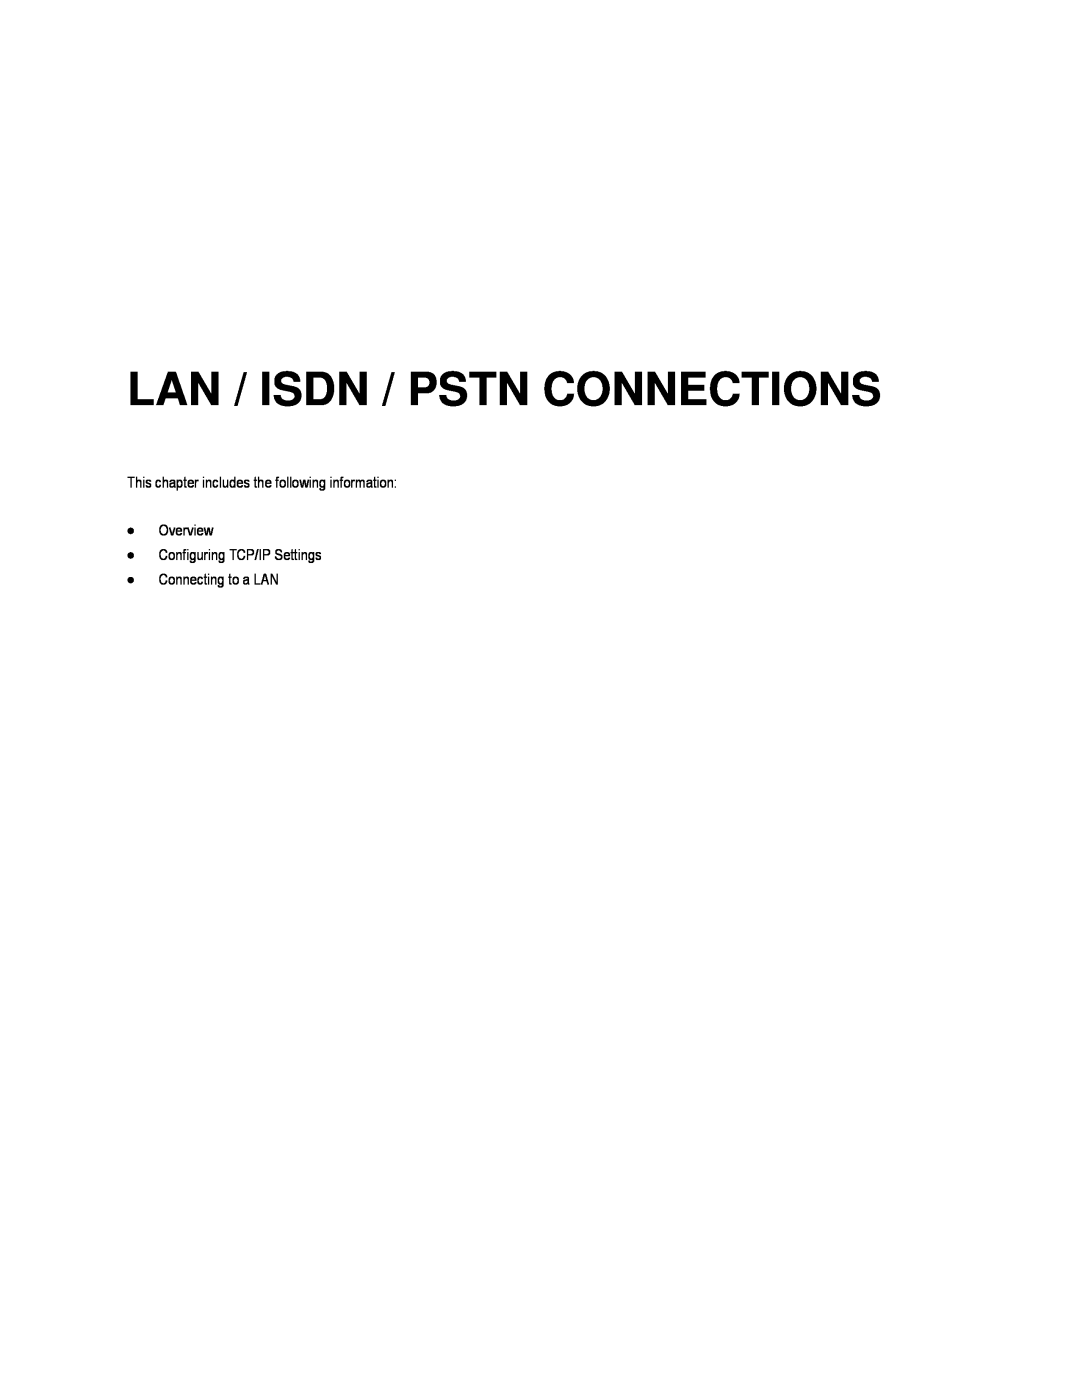 Toshiba HVR8-X, EVR8-X, EVR32-X Lan / Isdn / Pstn Connections, This chapter includes the following information Overview 